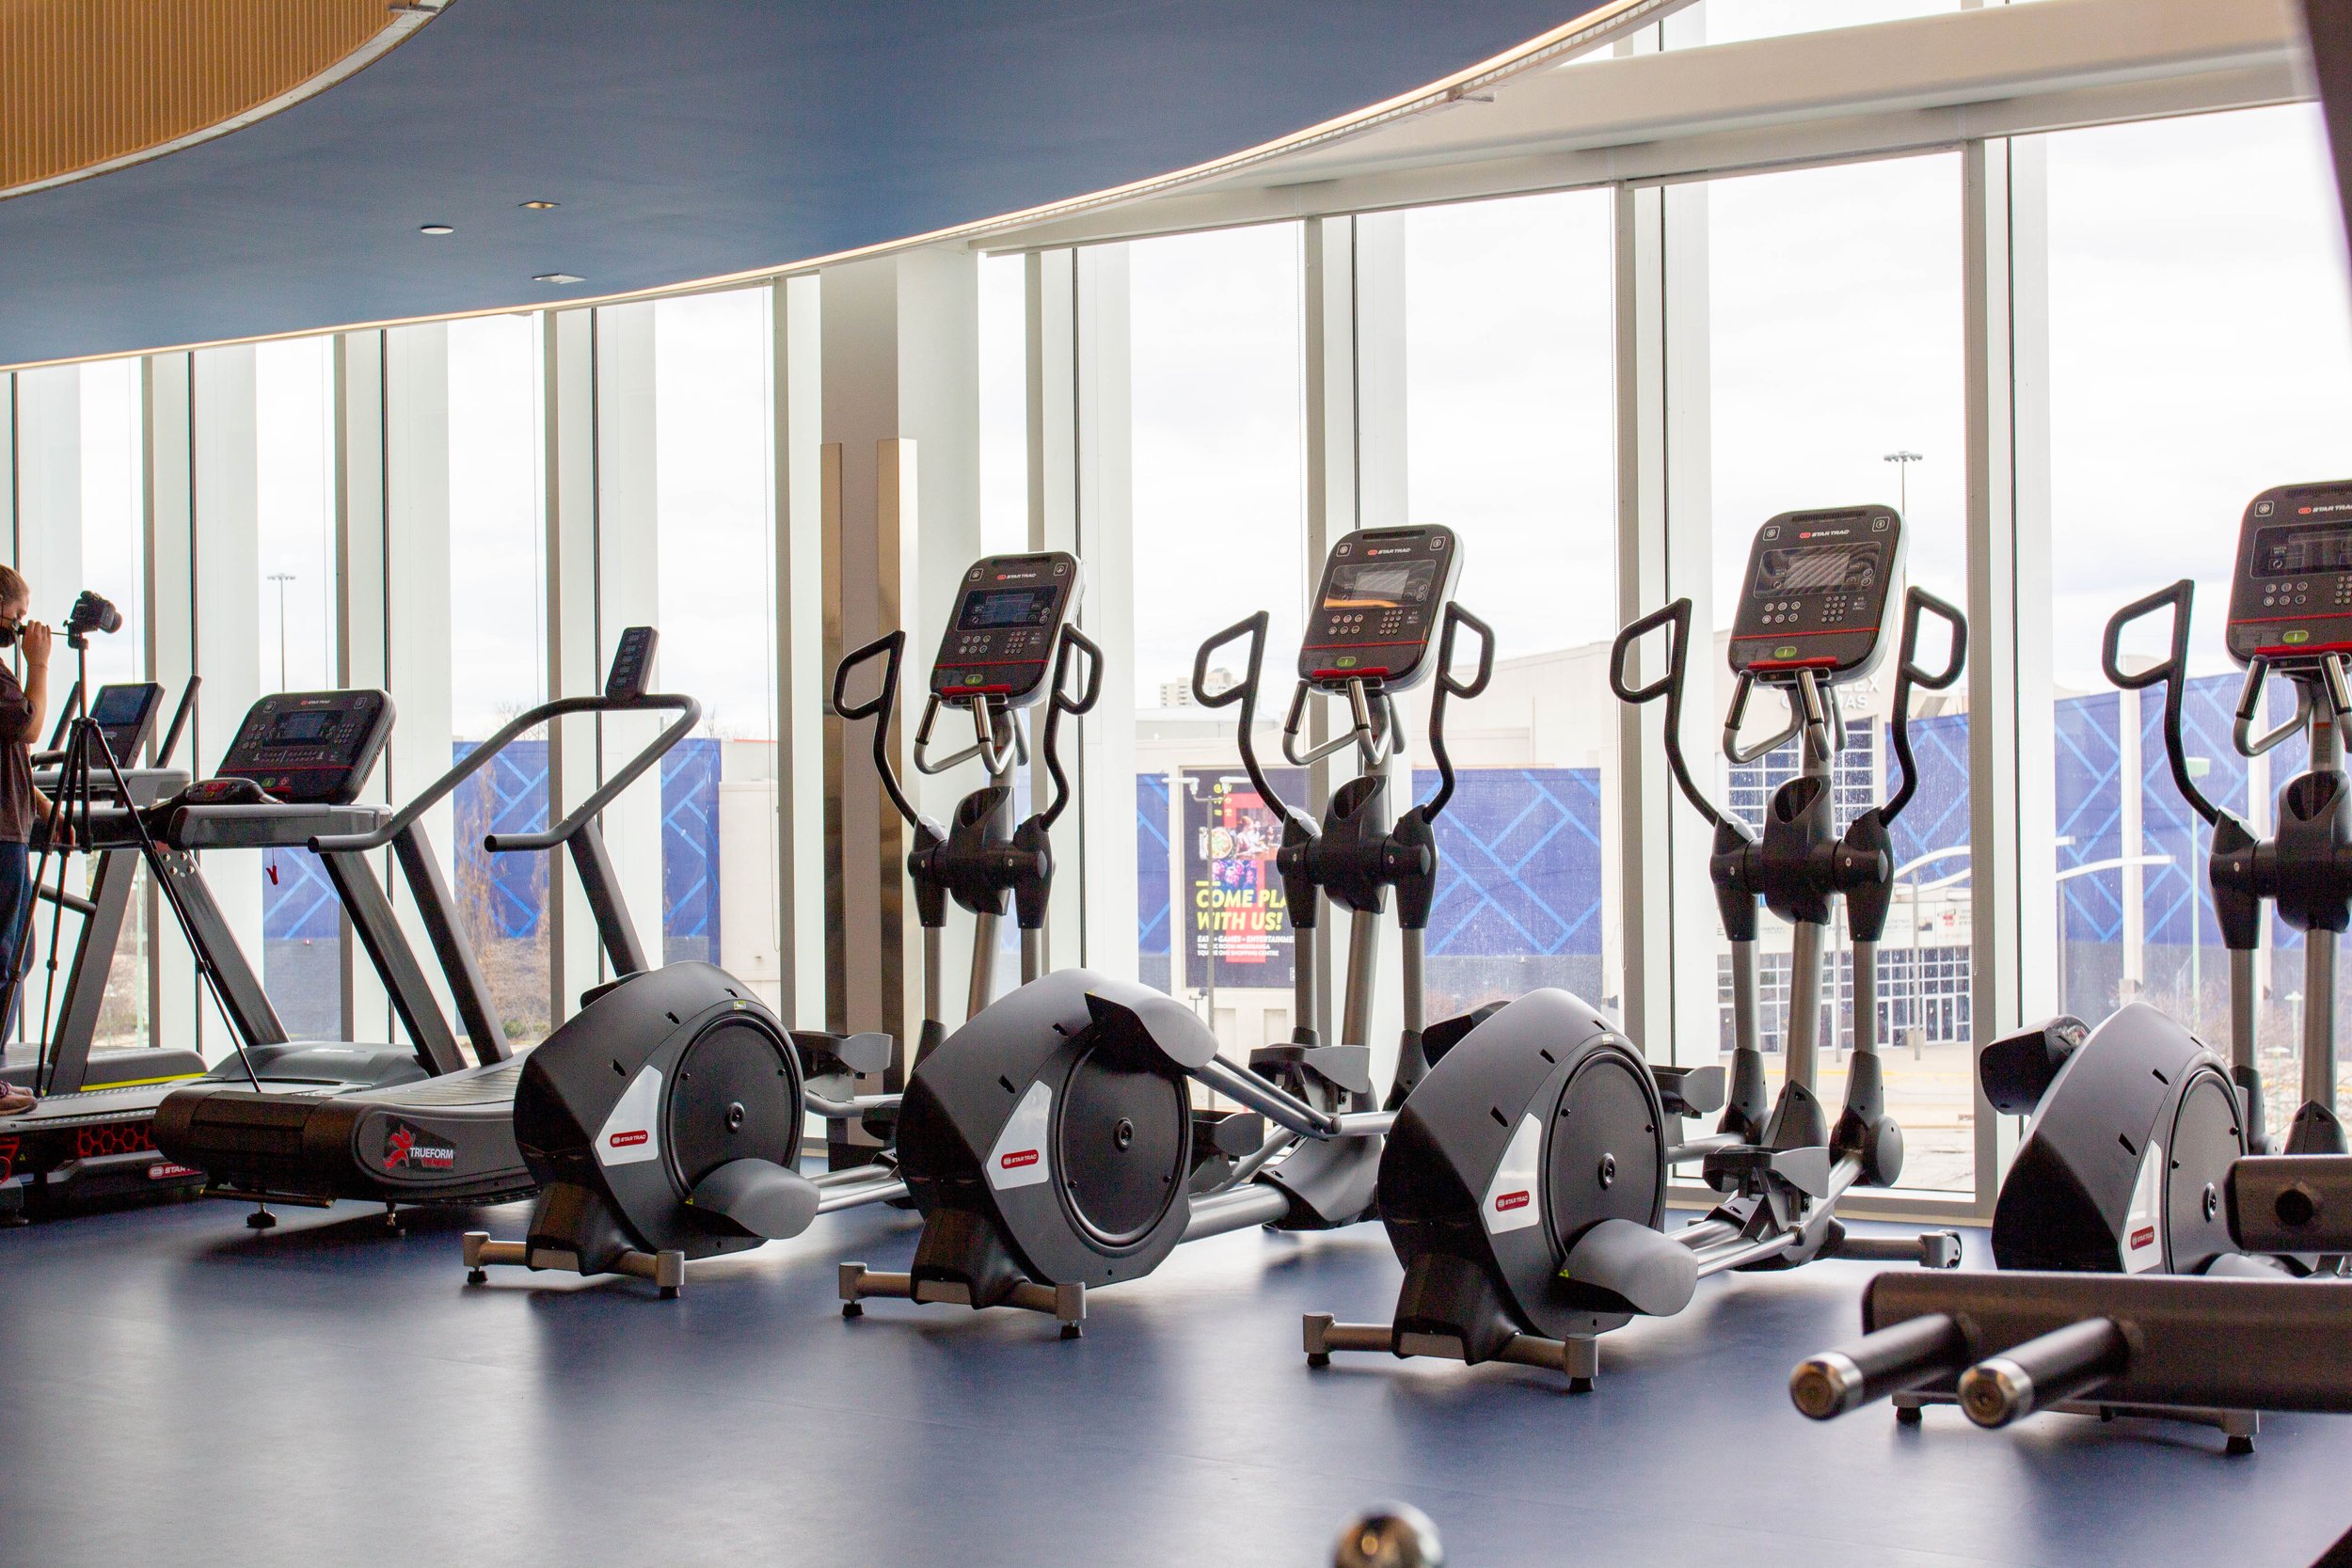  A row of elliptical machines and treadmills facing a glass window on a navy blue floor.  